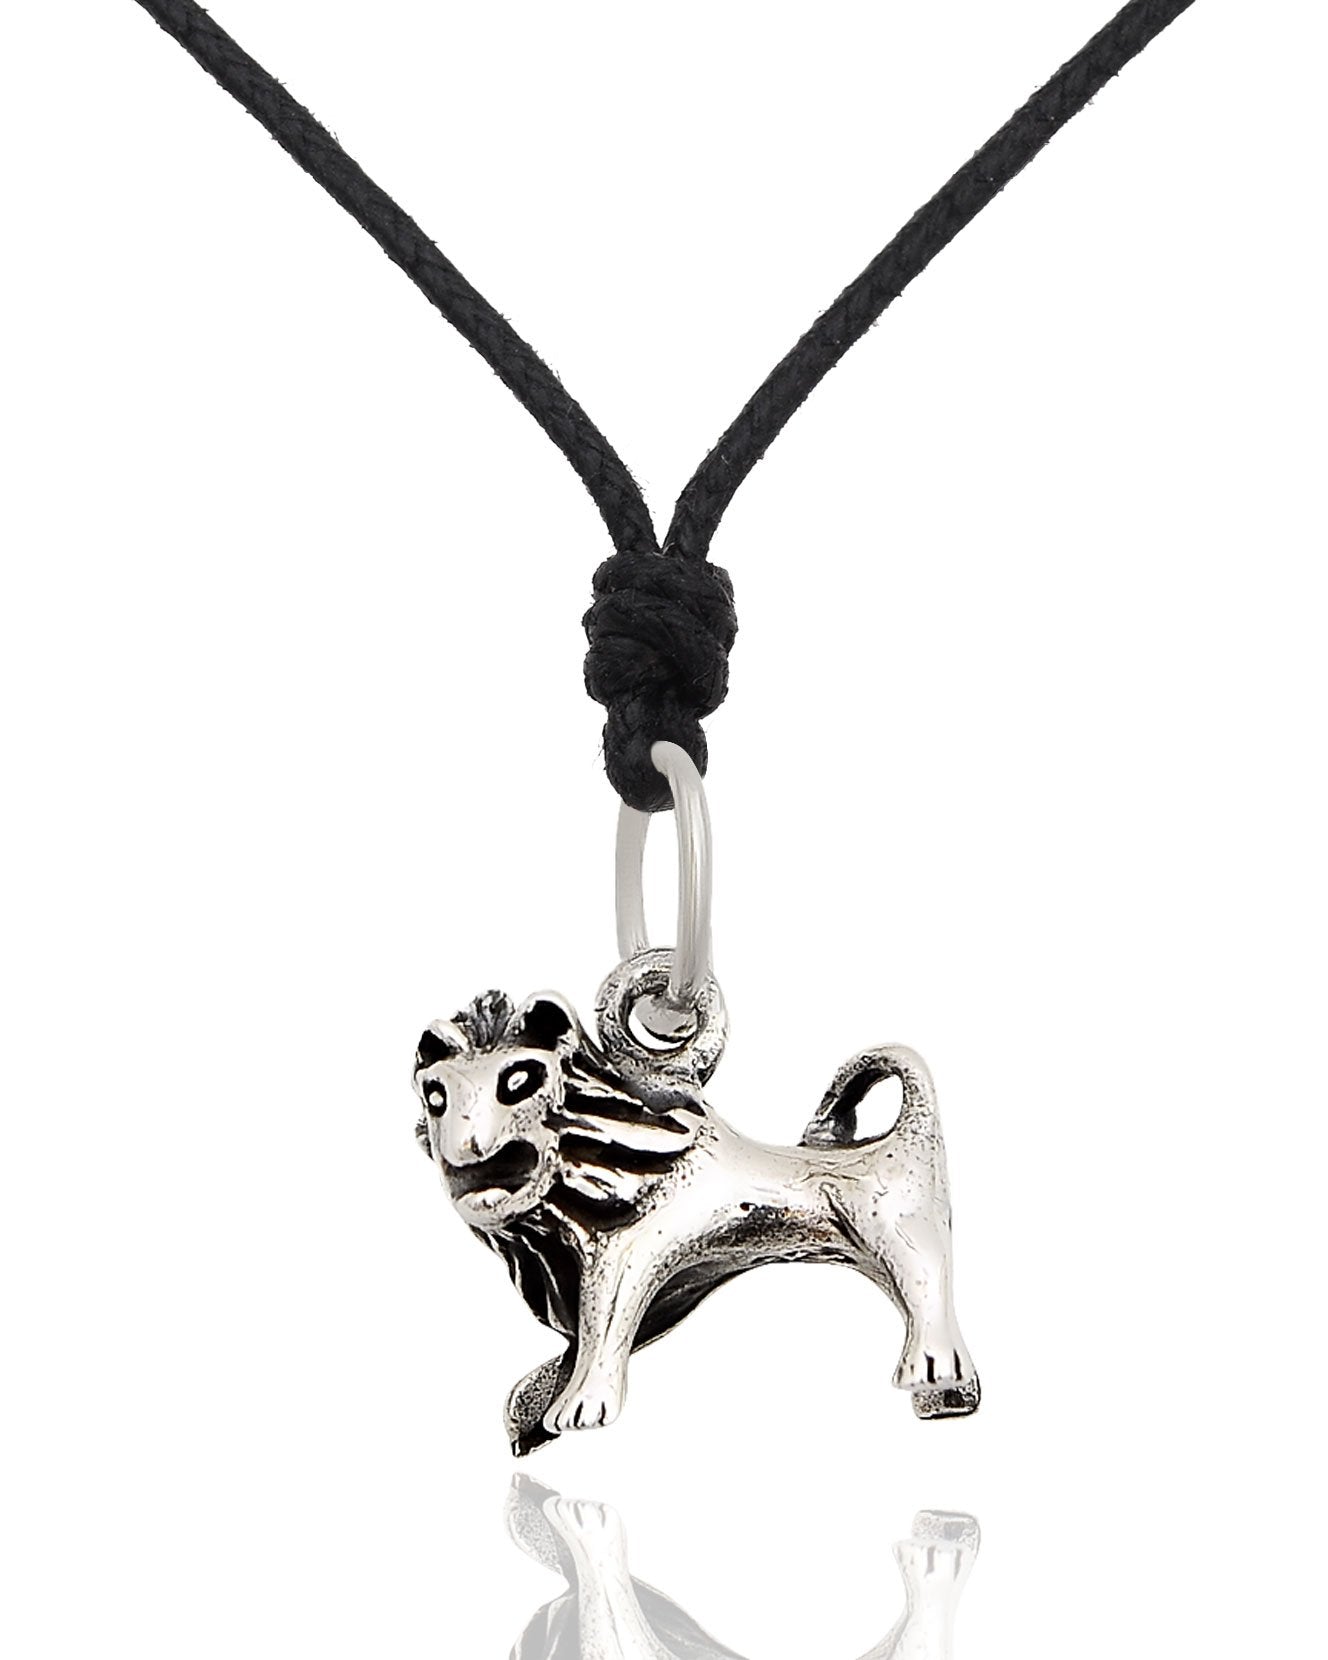 Lion Big Cat 92.5 Sterling Silver Gold Brass Charm Necklace Pendant Jewelry